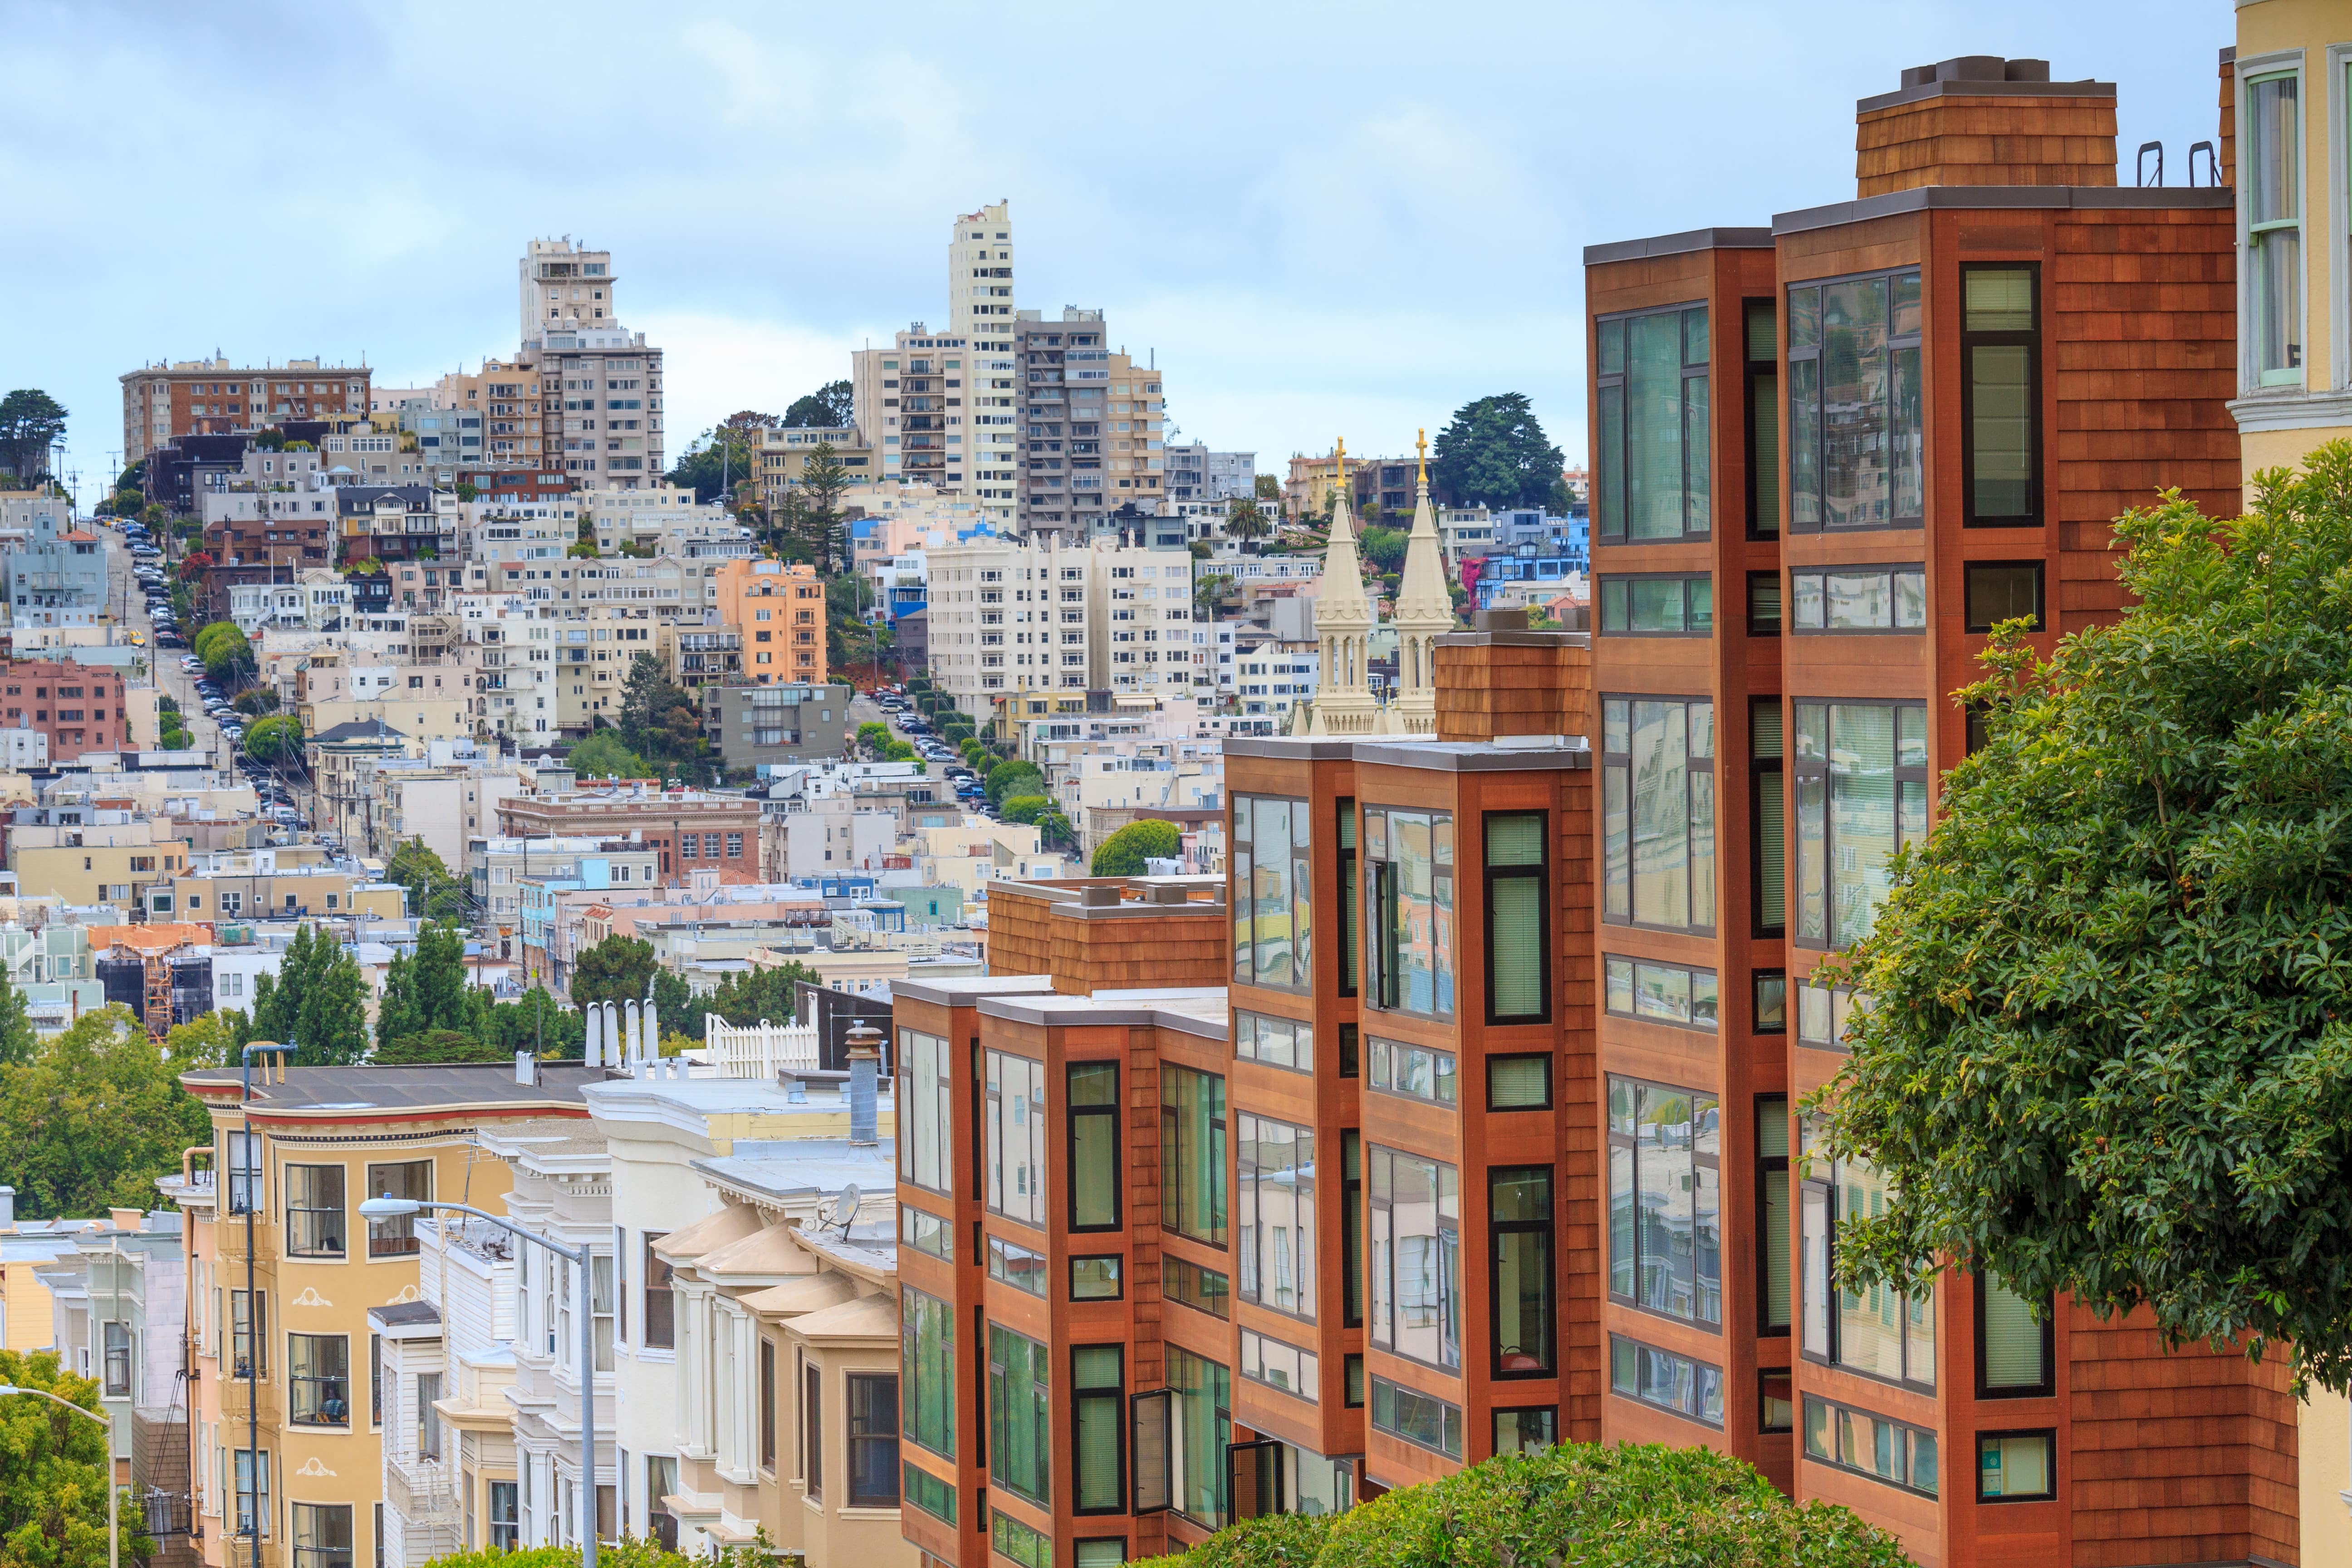 Image of view in San Fransisco